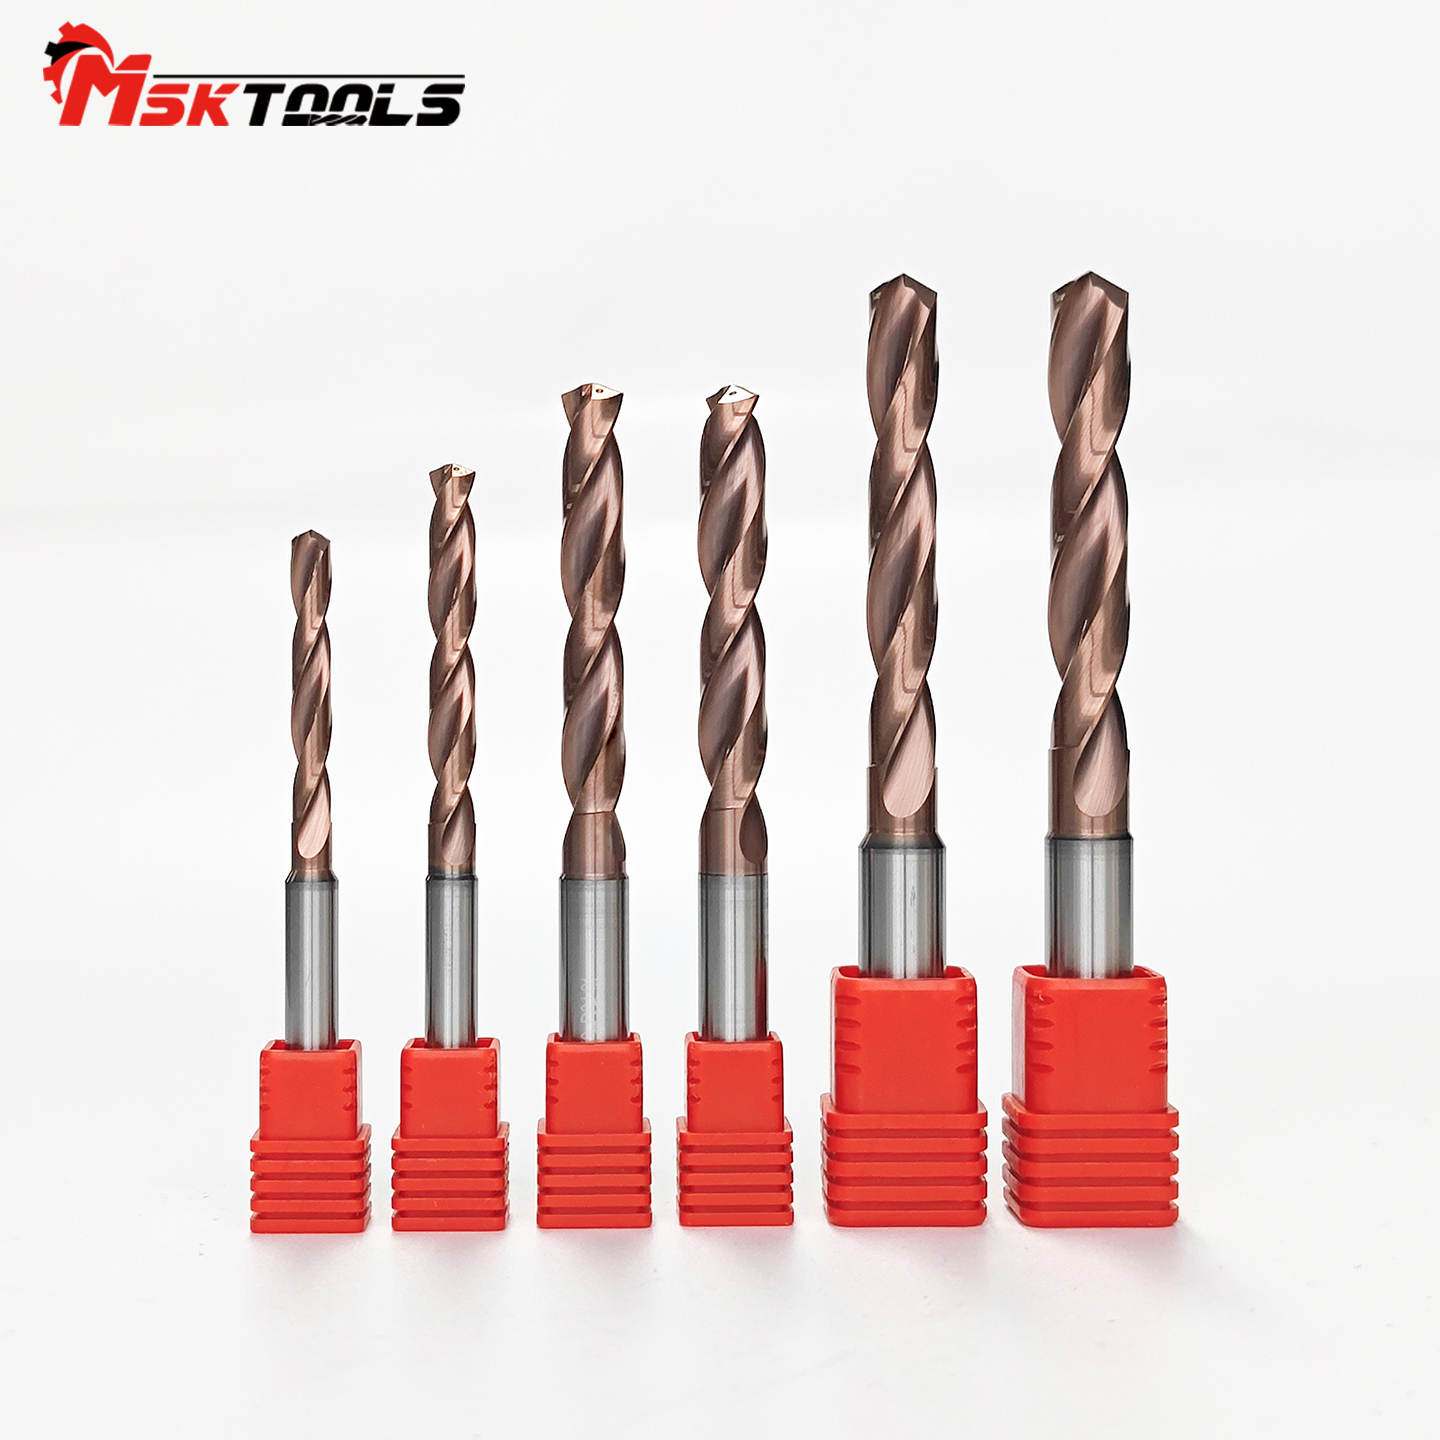 3xD 5xD HRC55 Solid Carbide Coolant Drills